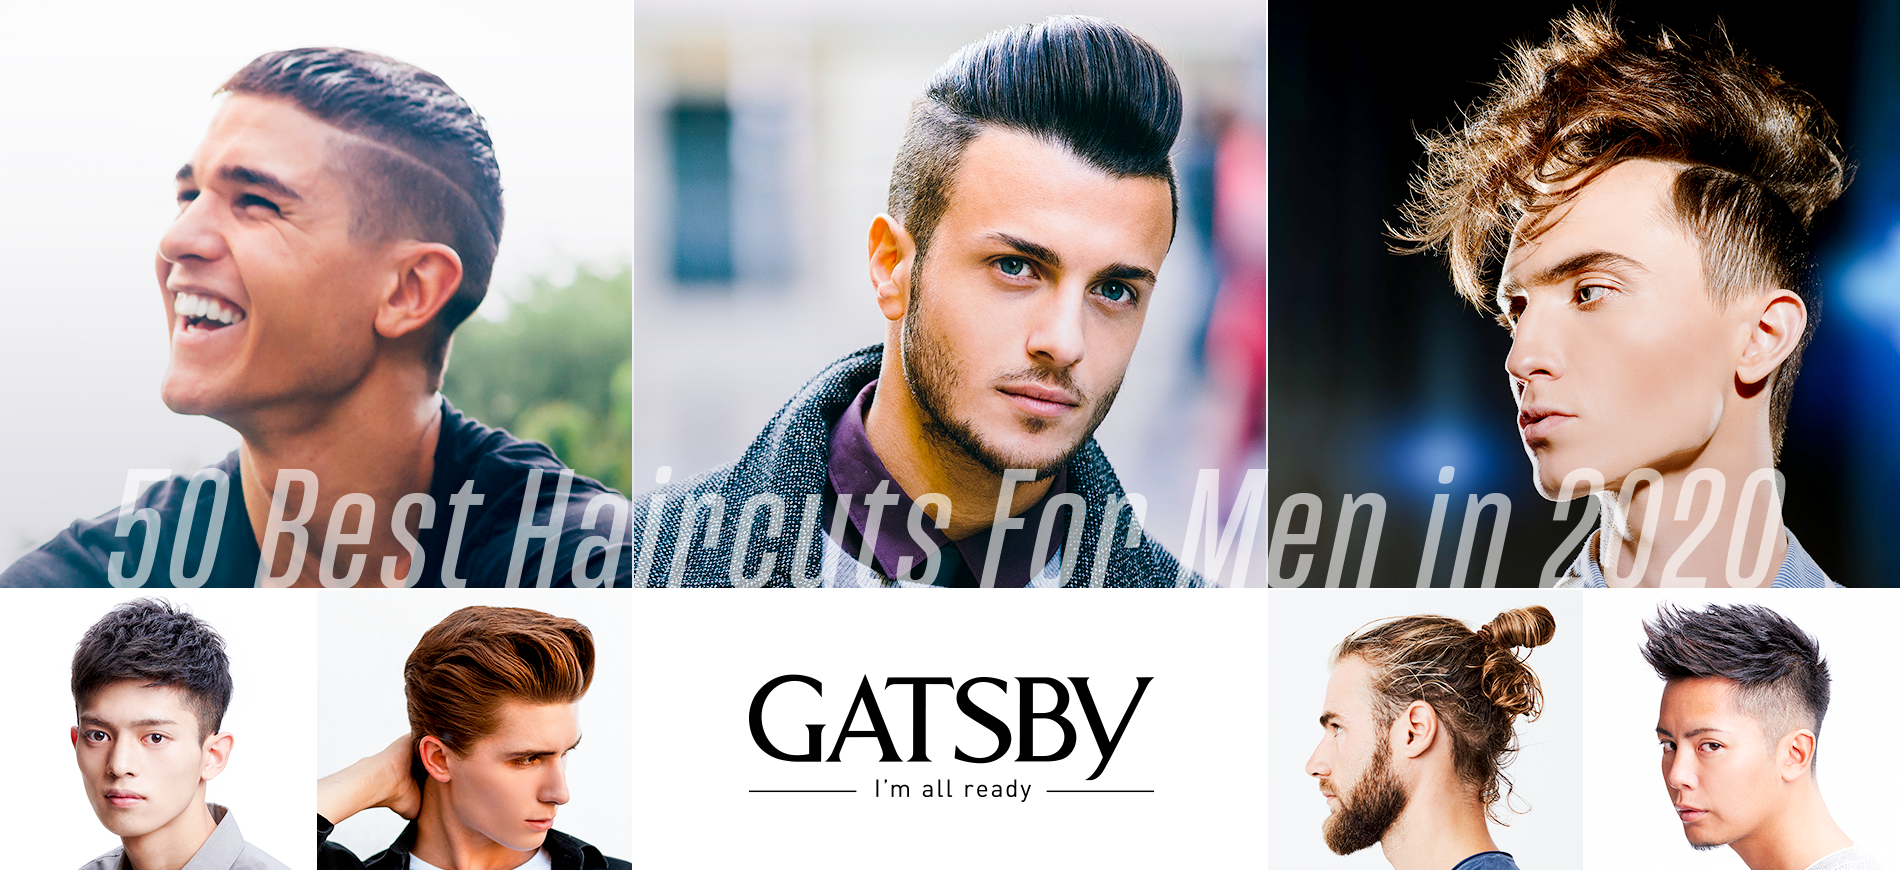 The Essential Guide to Men's Undercut Hairstyle by GATSBY